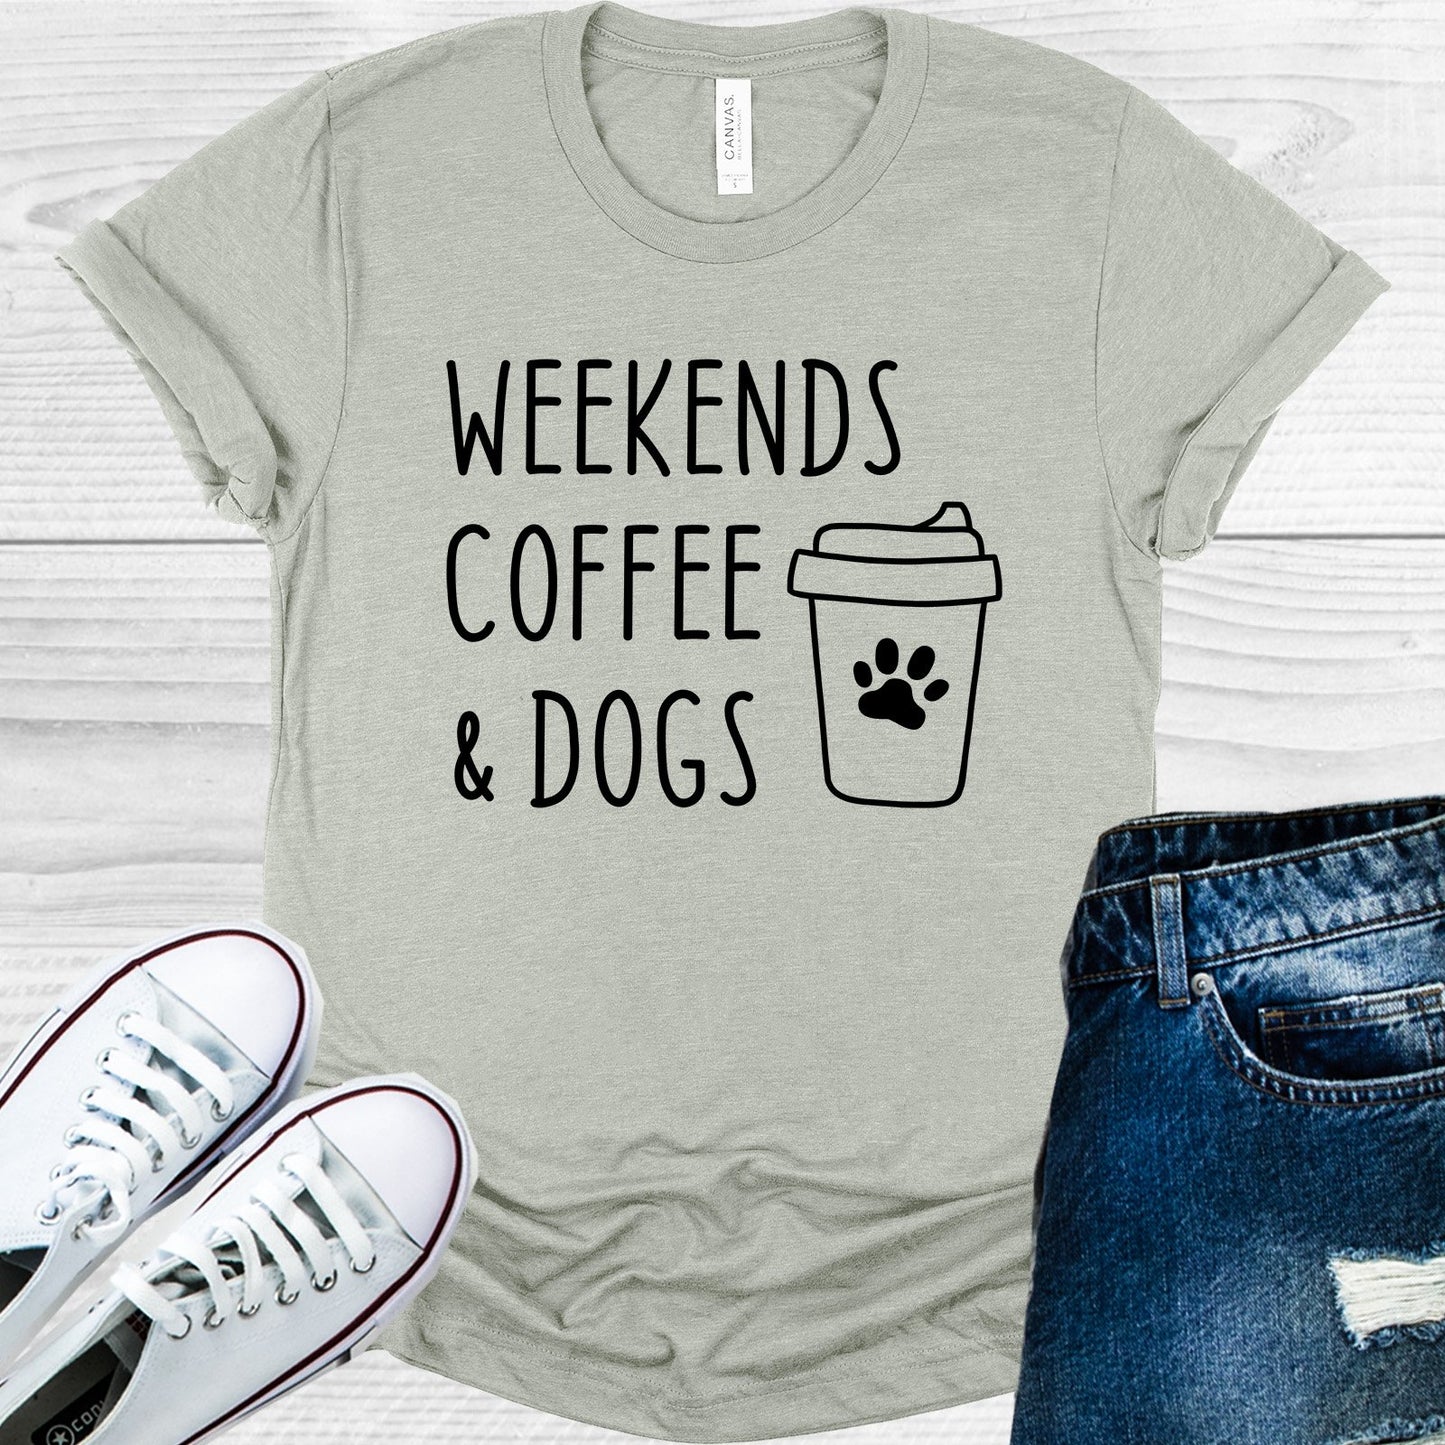 Weekends Coffee & Dogs Graphic Tee Graphic Tee